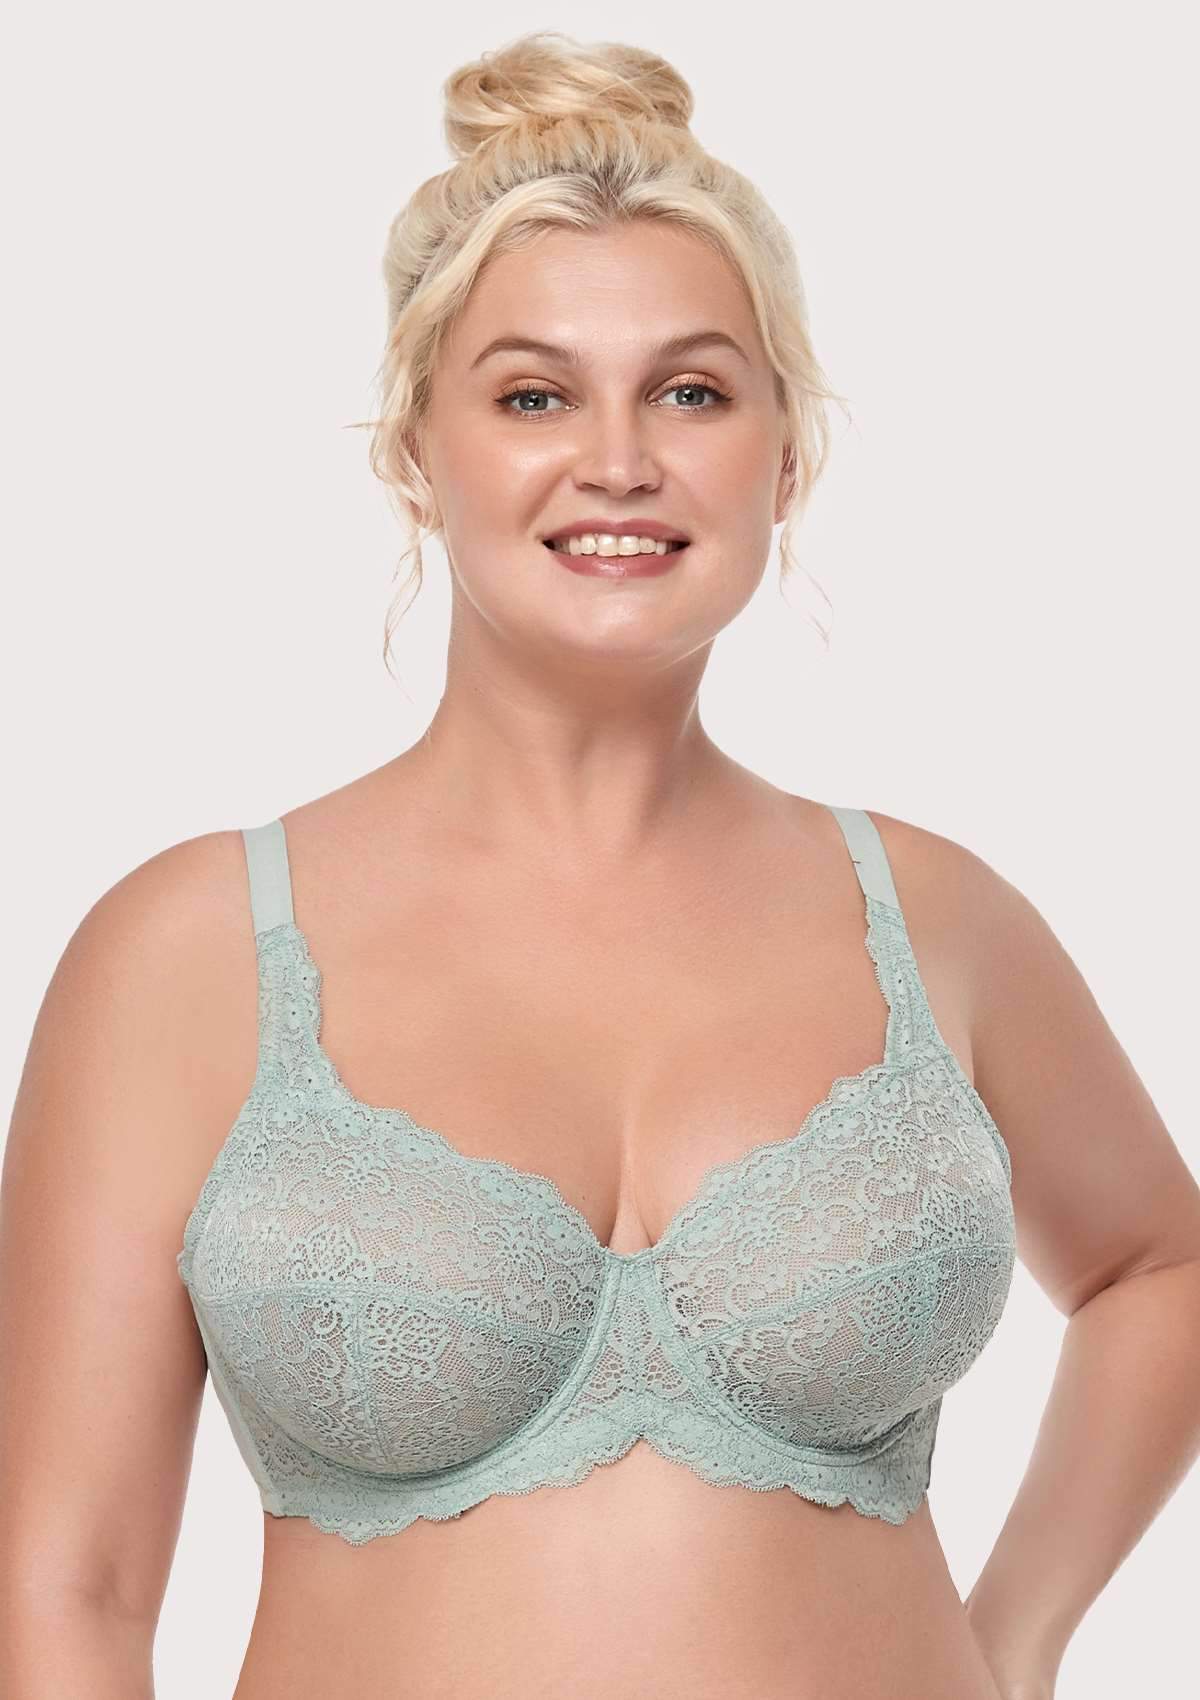 HSIA All-Over Floral Lace: Best Bra For Elderly With Sagging Breasts - Crystal Blue / 38 / DDD/F